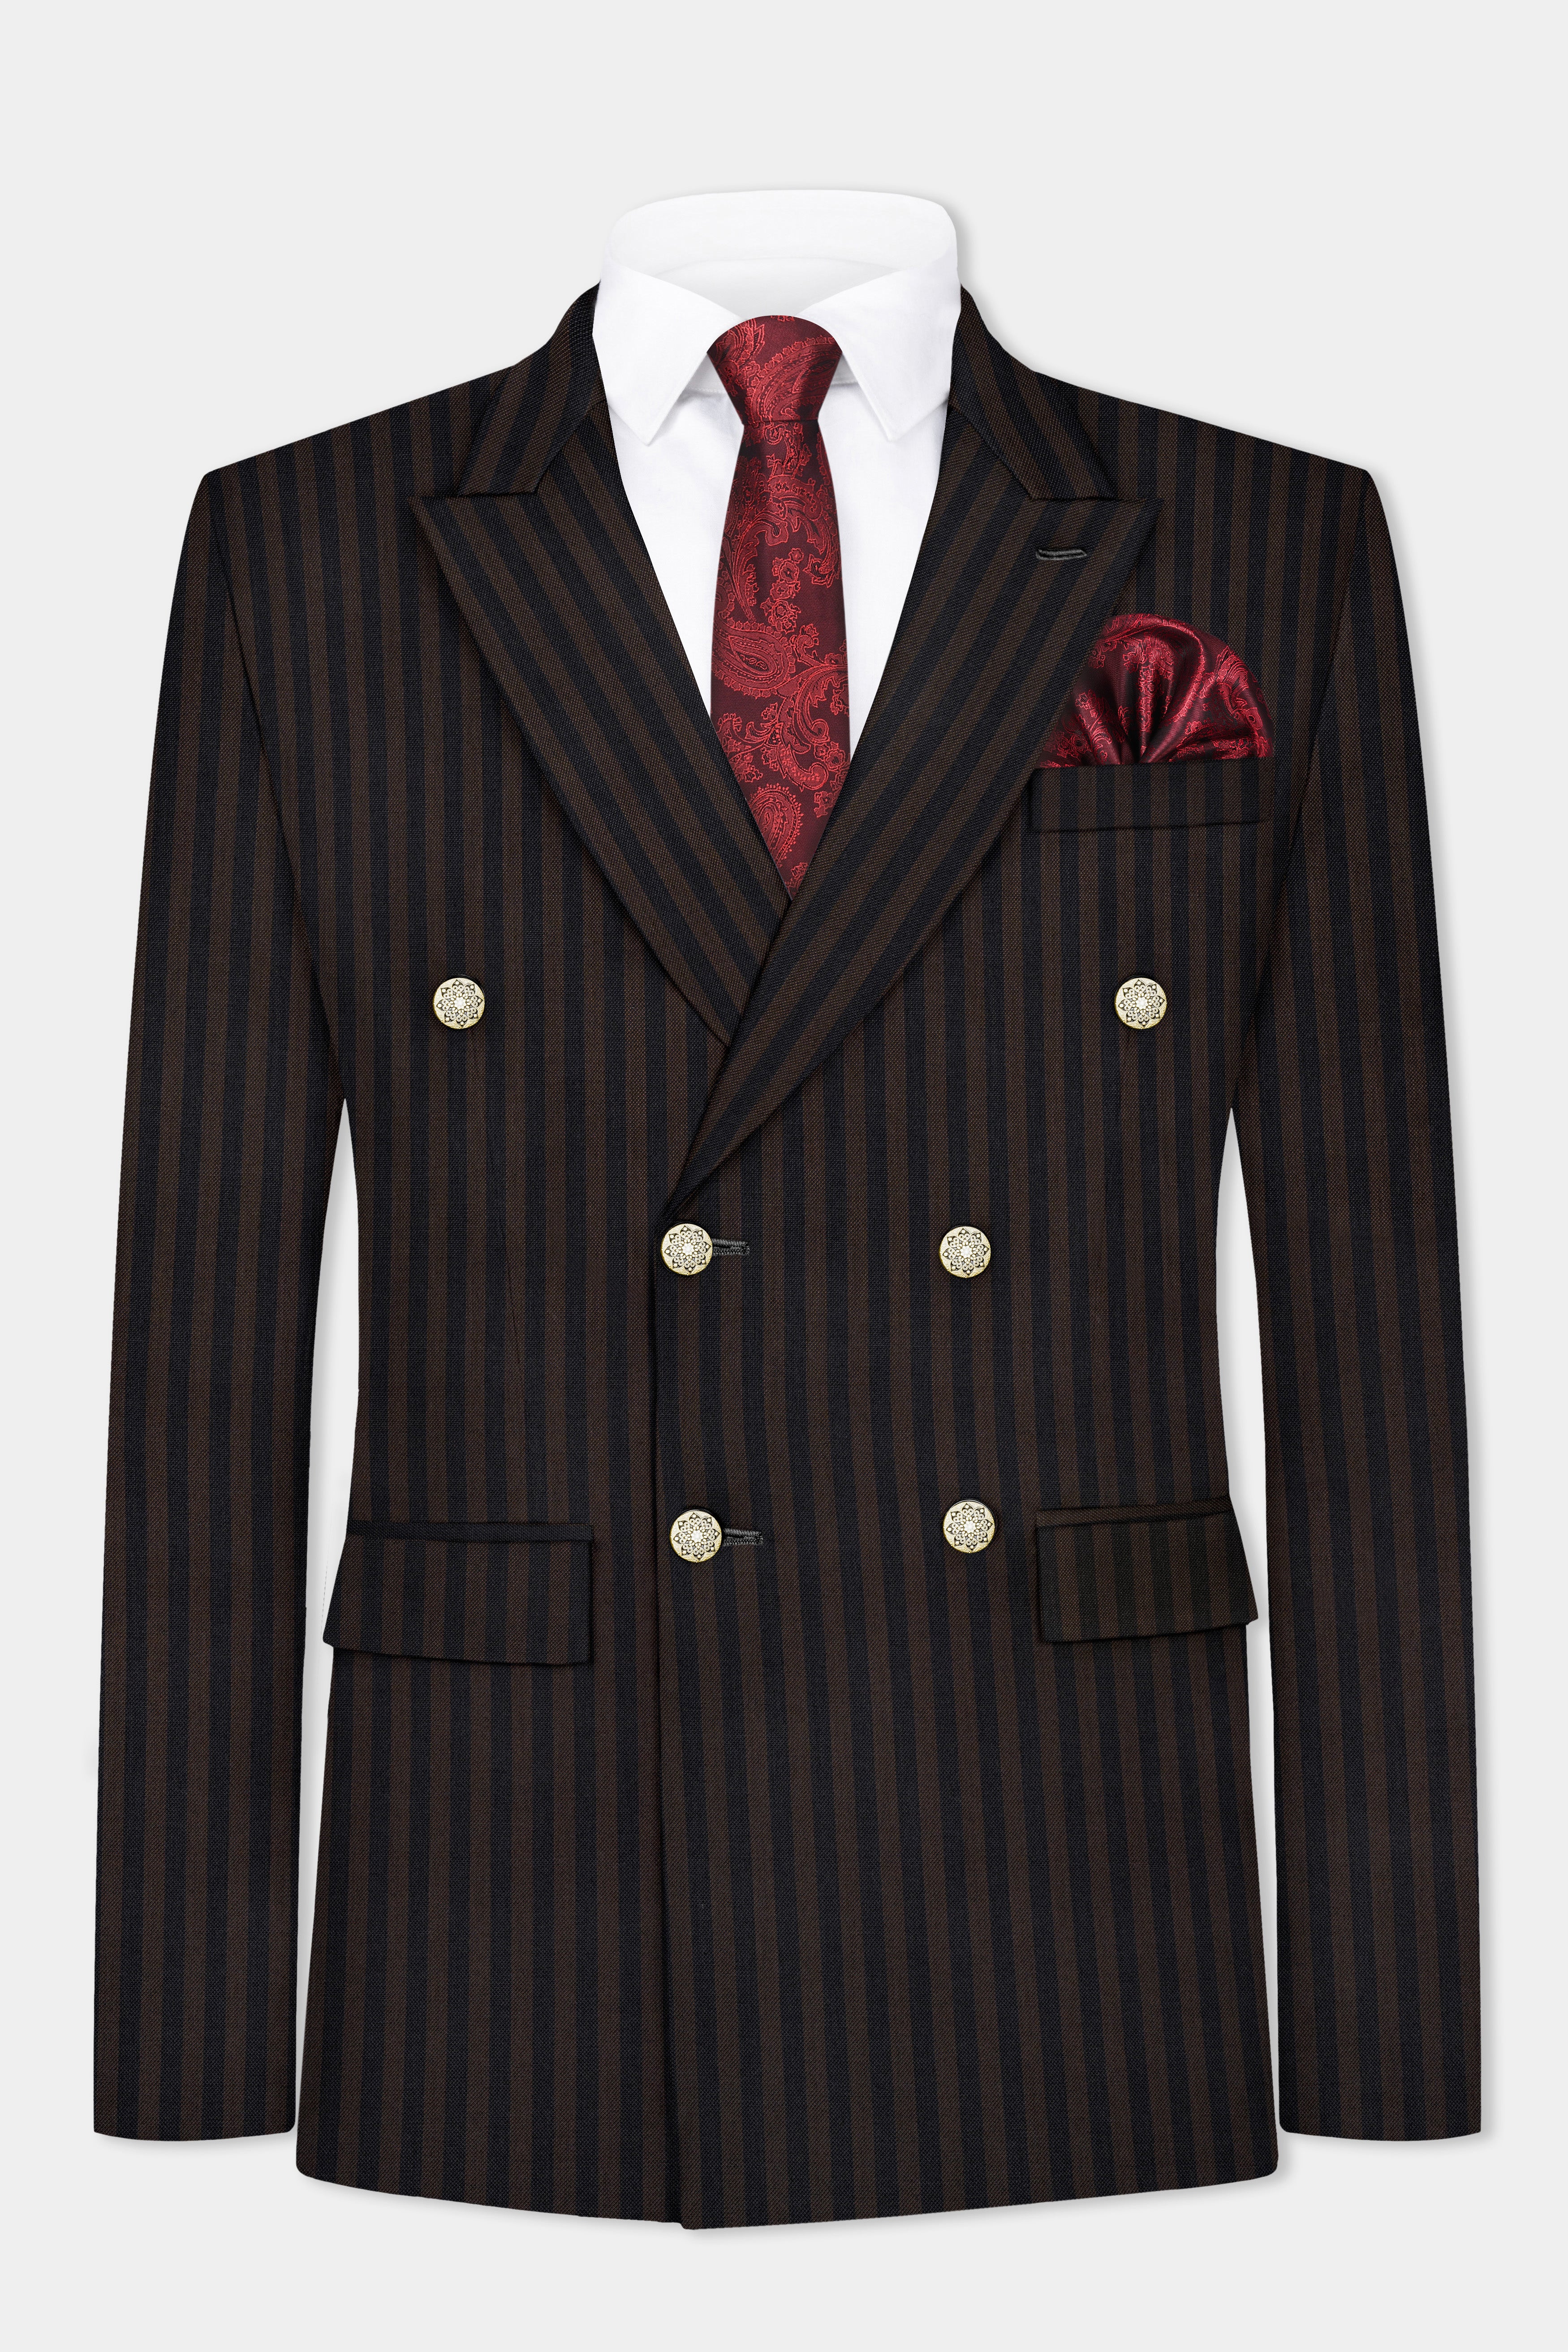 Eternity Brown With Vulcan Black Striped Wool Blend Double Breasted Suit